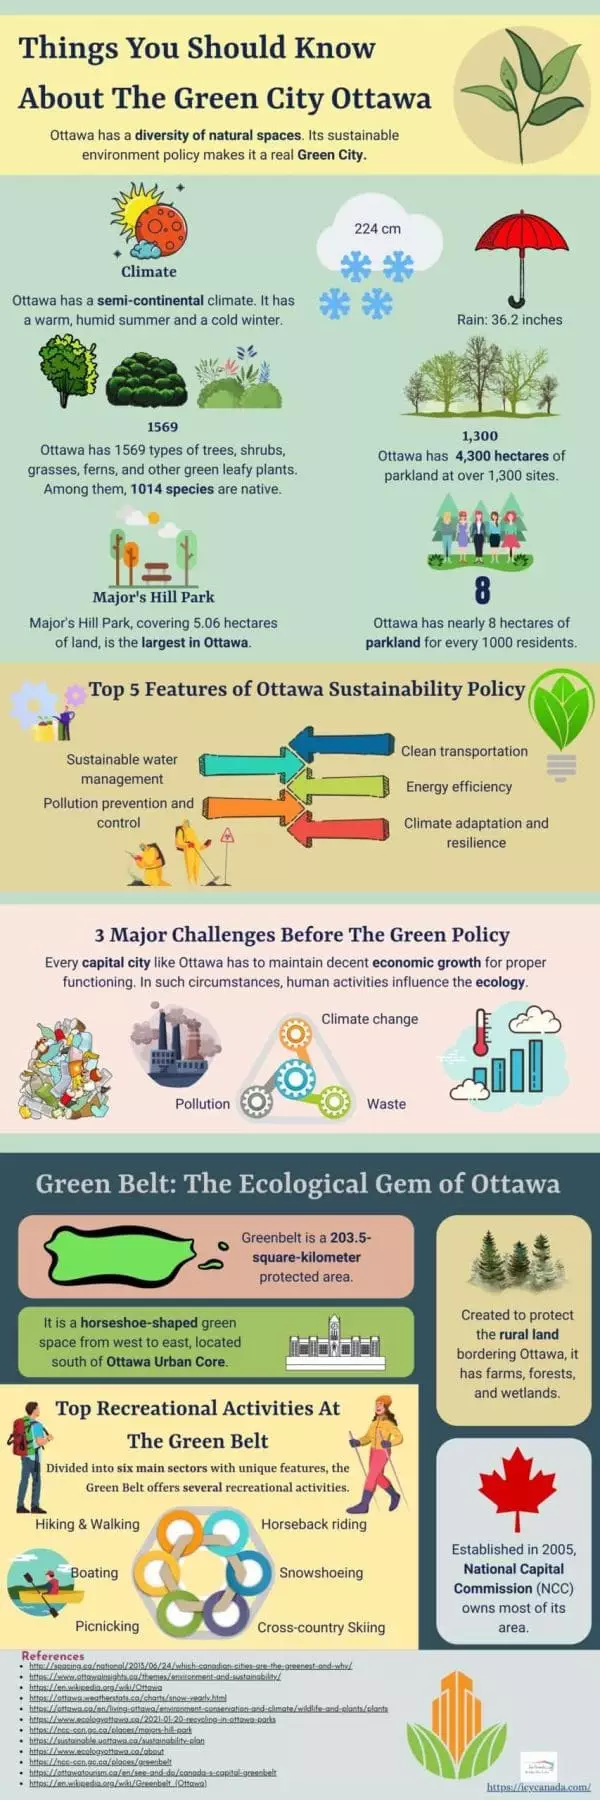 Things You Should Know About The Green City Ottawa